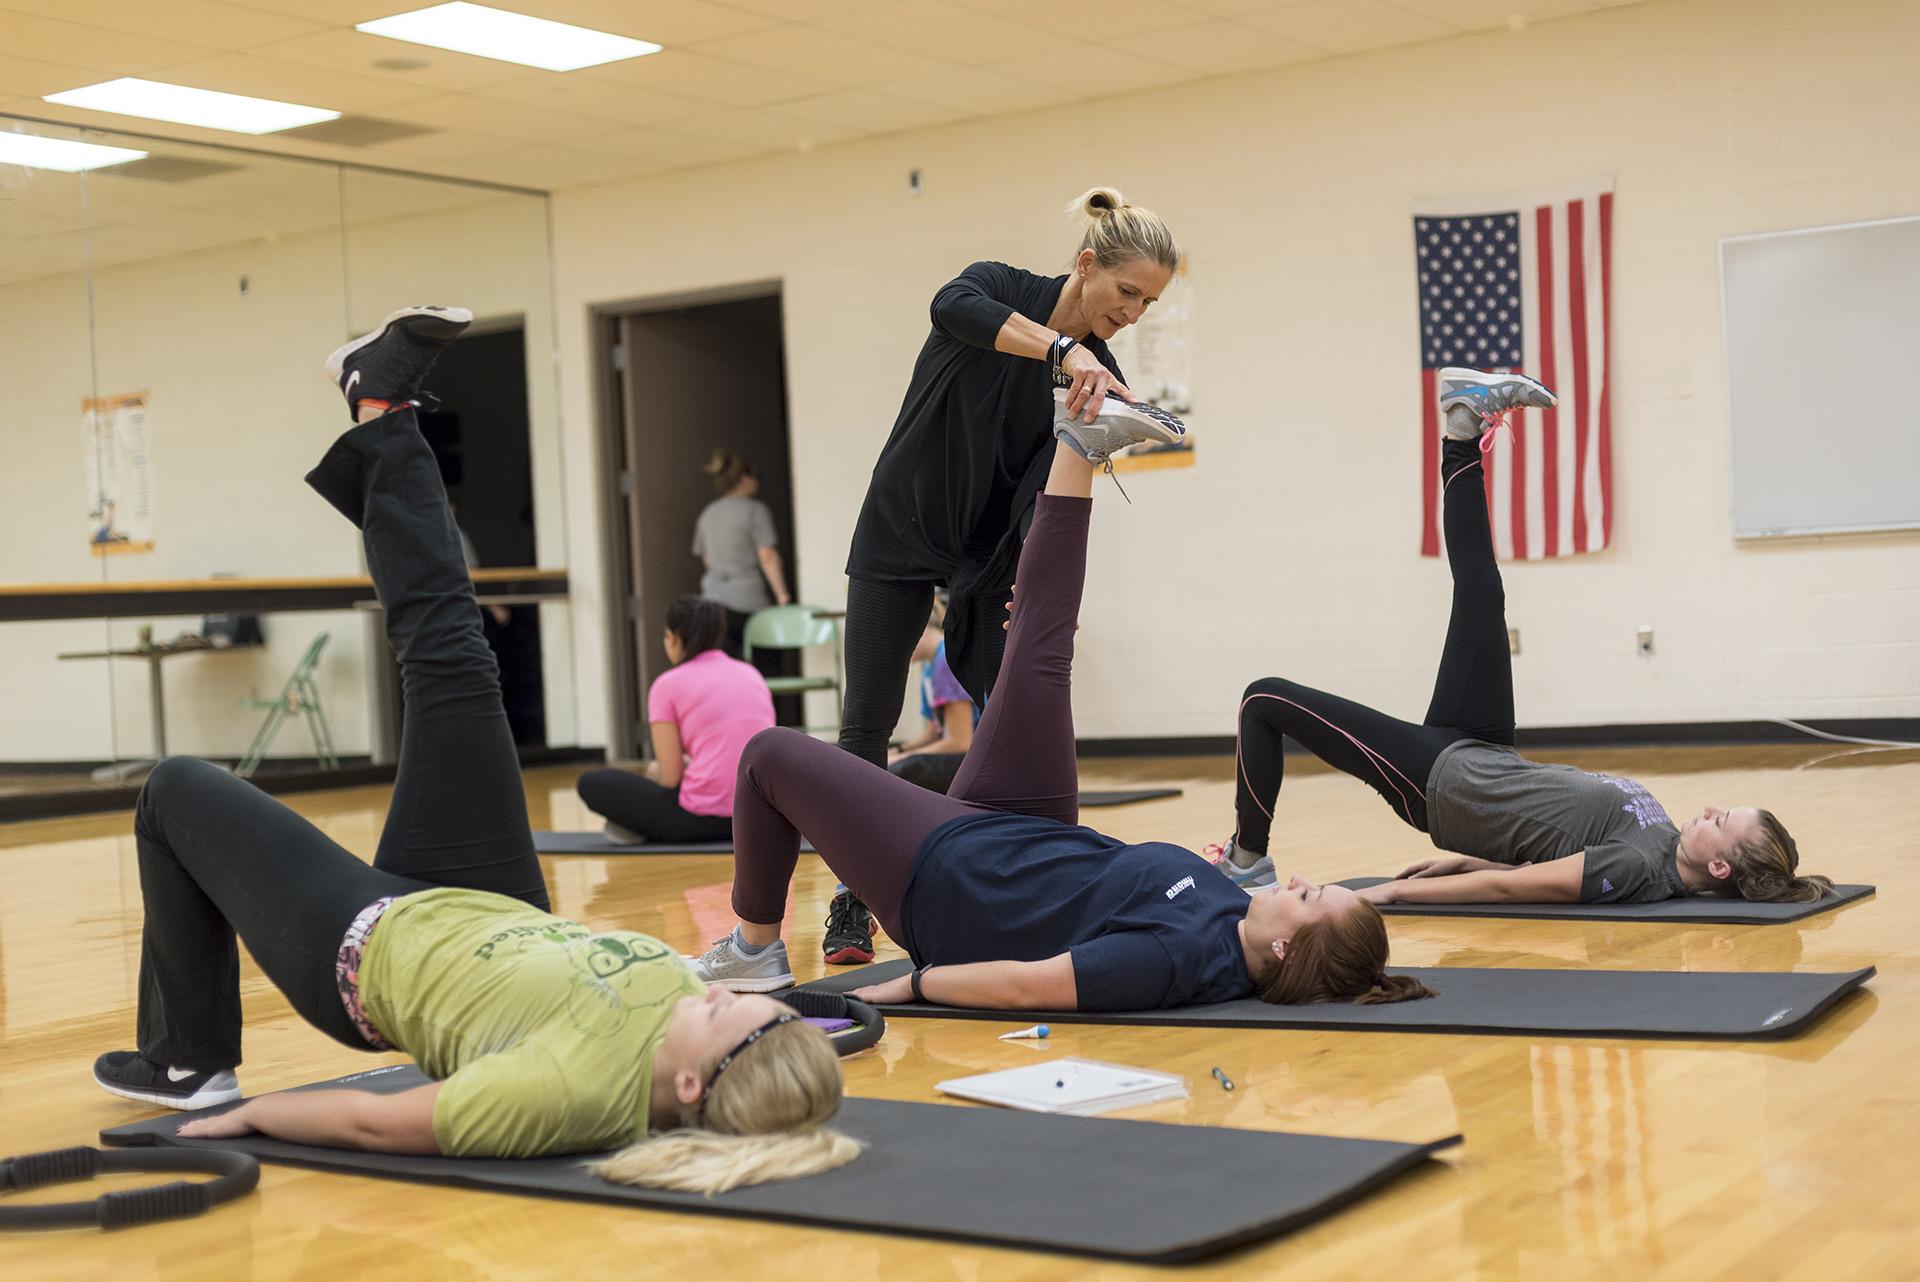 Group classes are offered, including a pilates class.